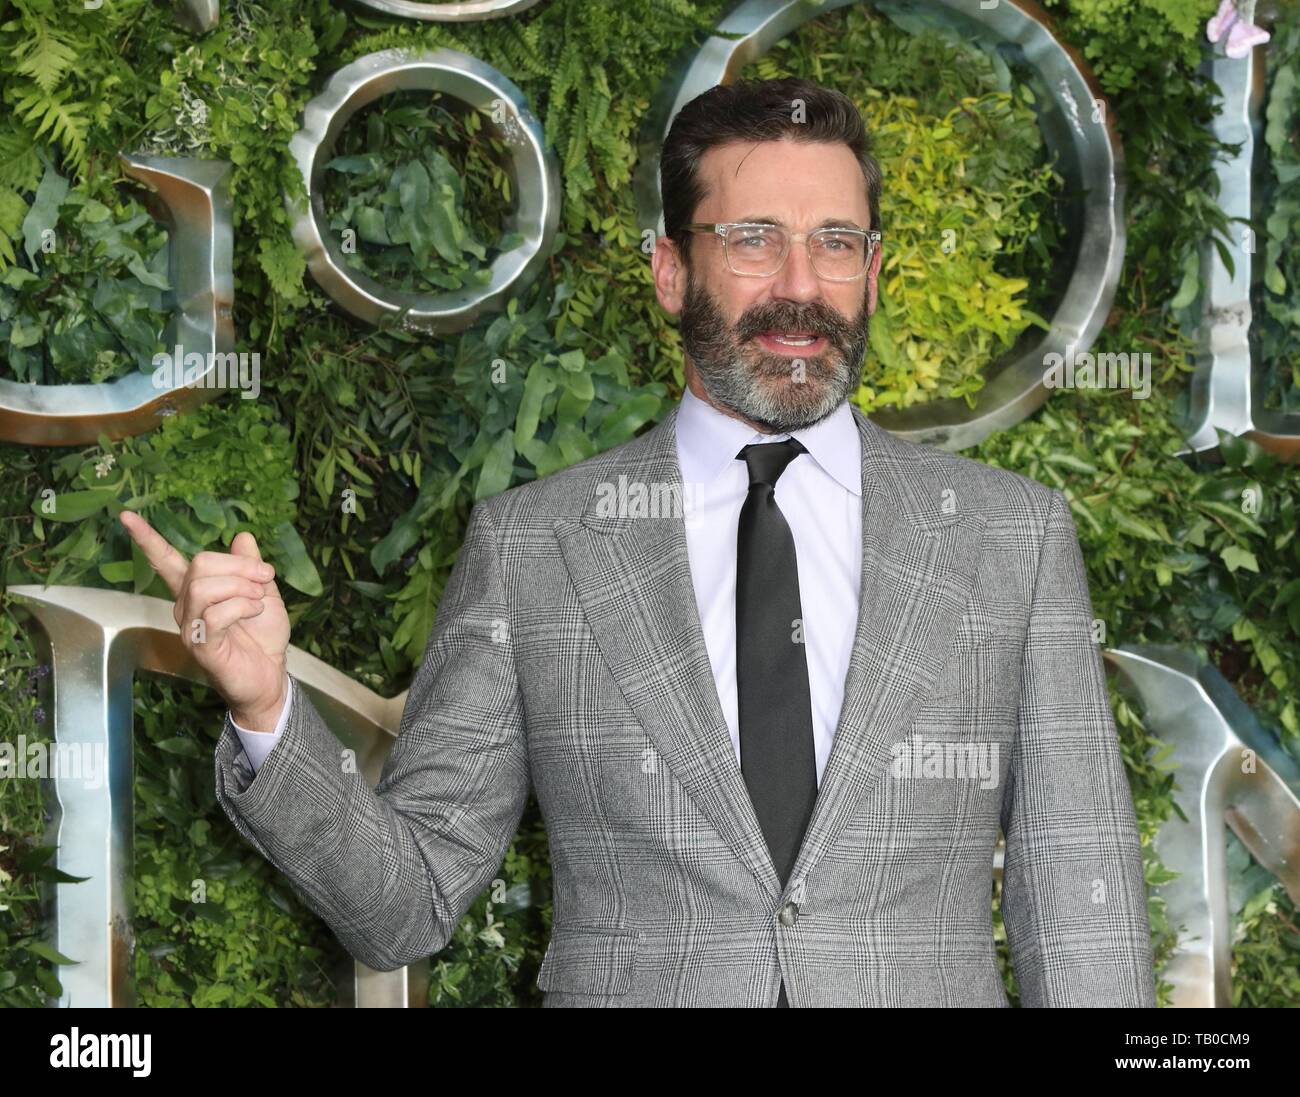 Jon Hamm at the Global TV Premiere of Amazon Original Good Omens at Odeon  Luxe Leicester Square Stock Photo - Alamy